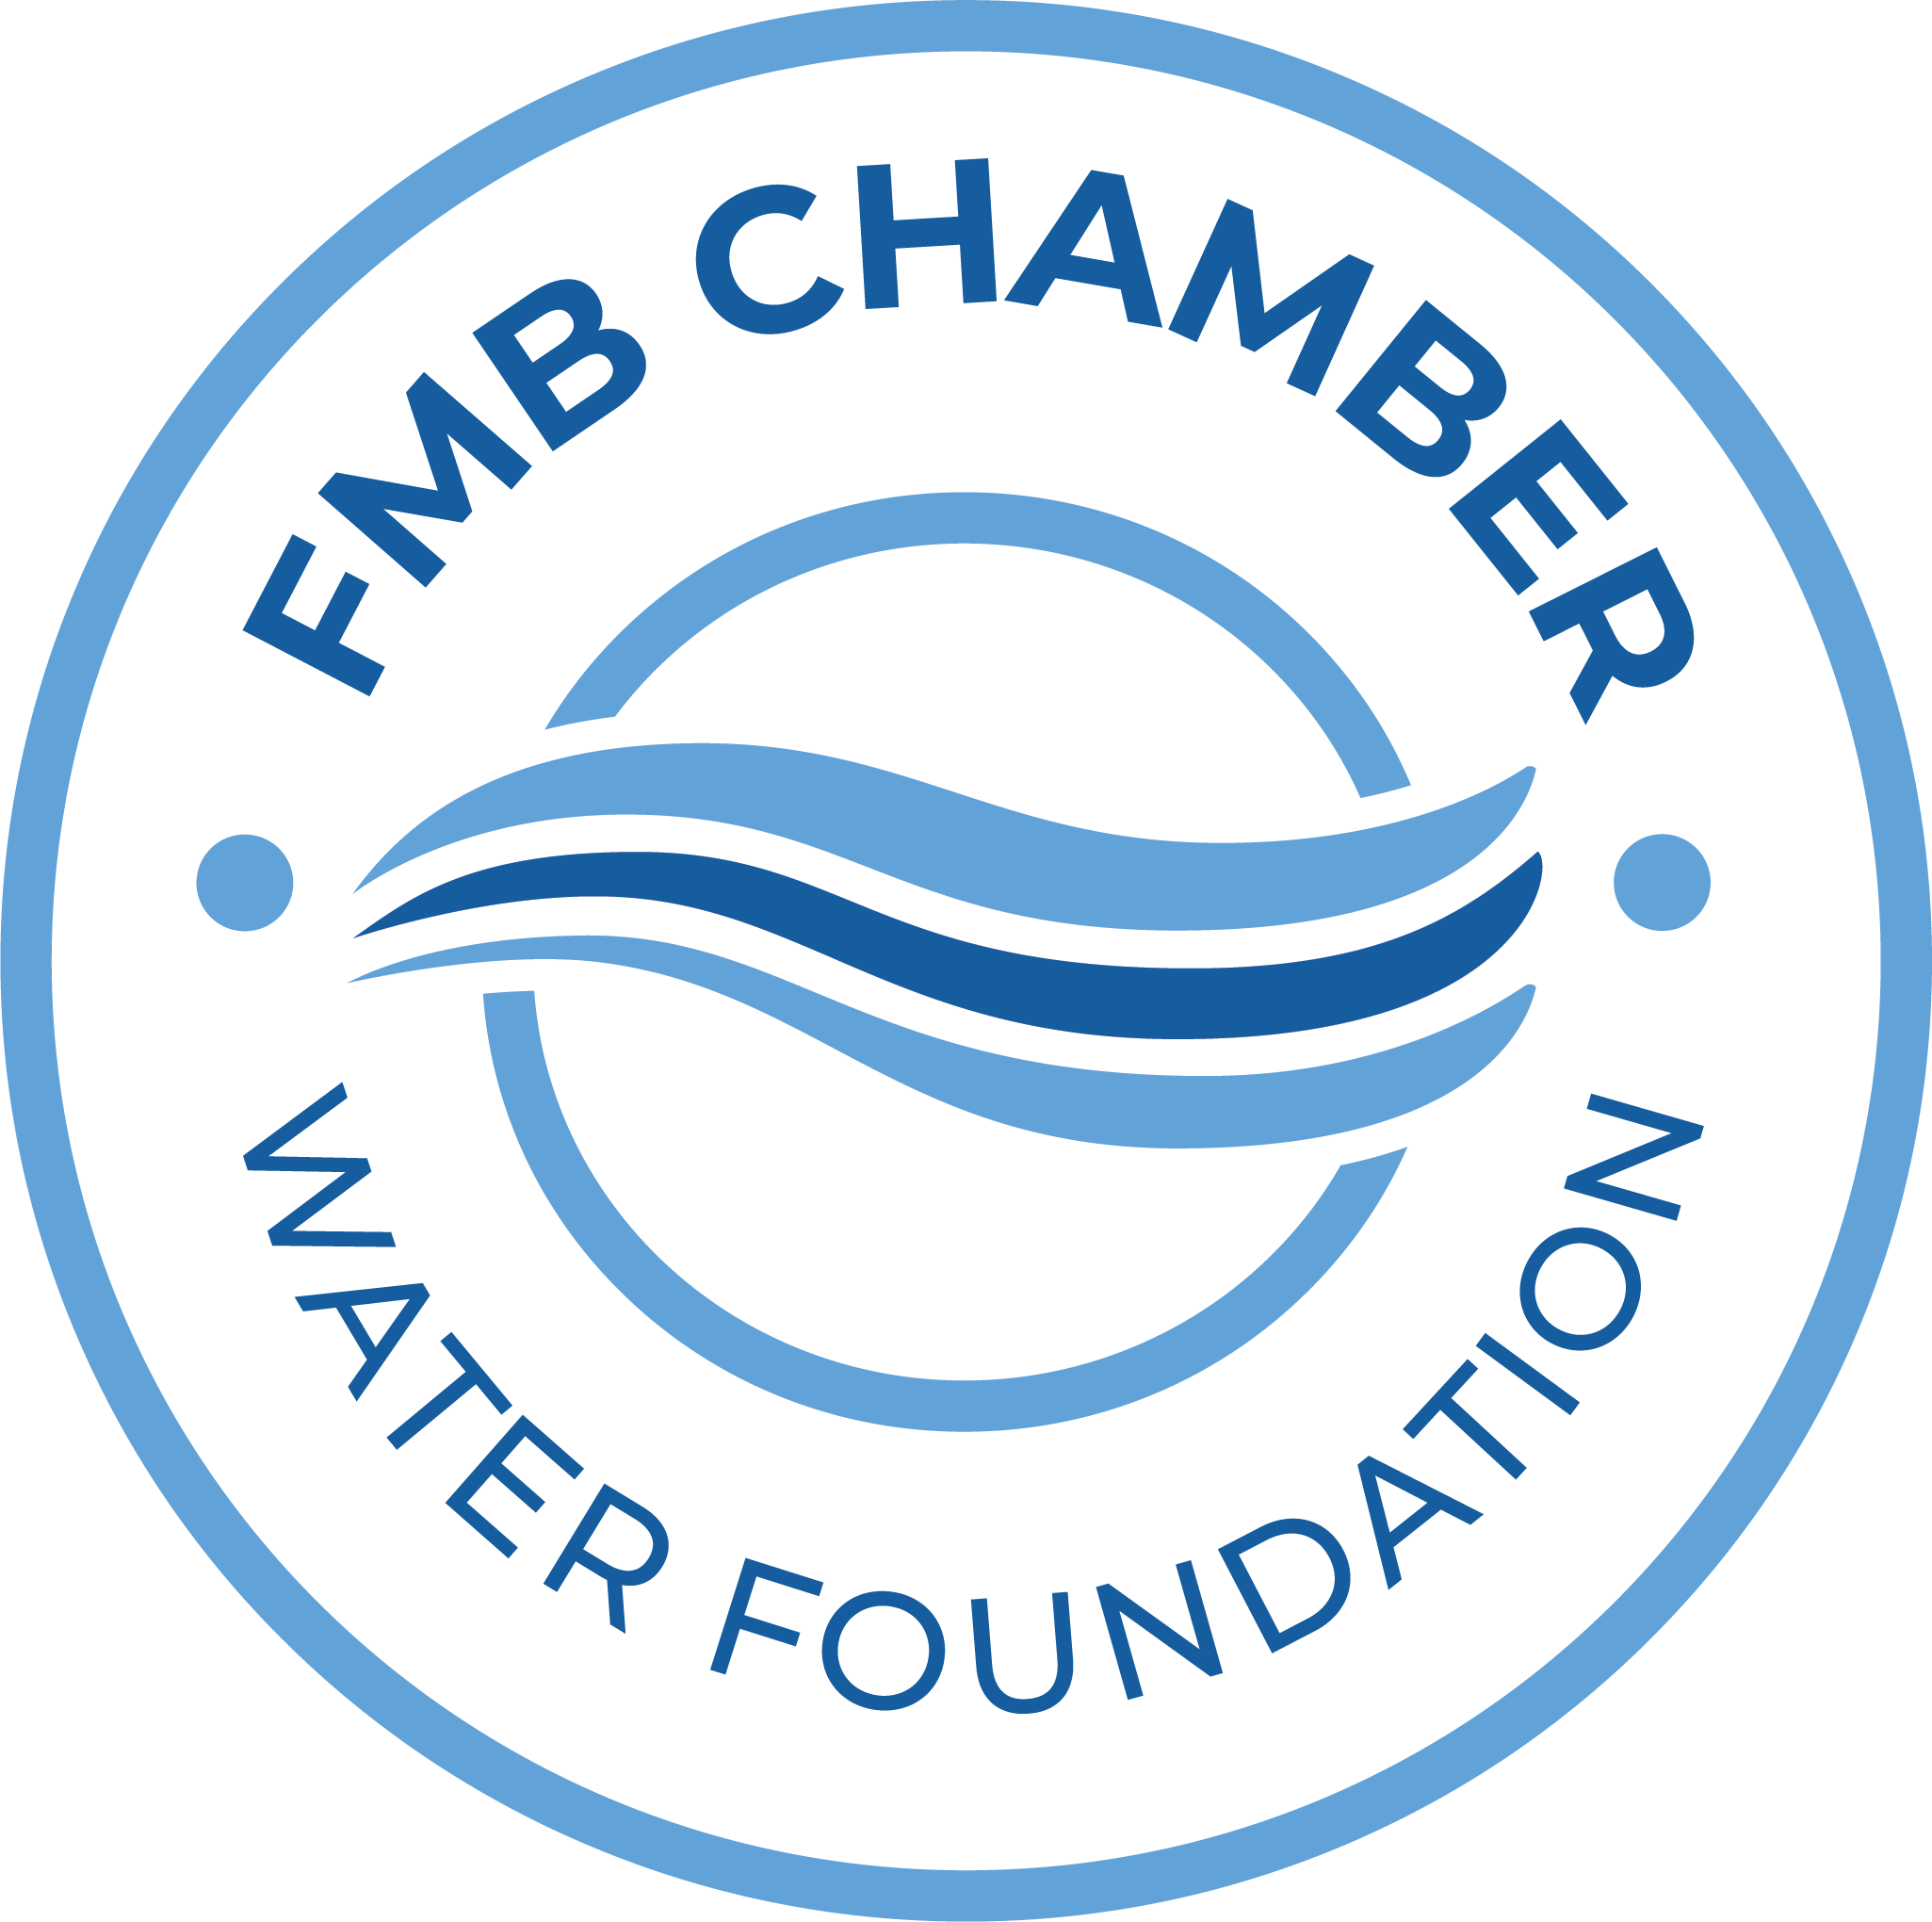 FMB COC Water Foundation